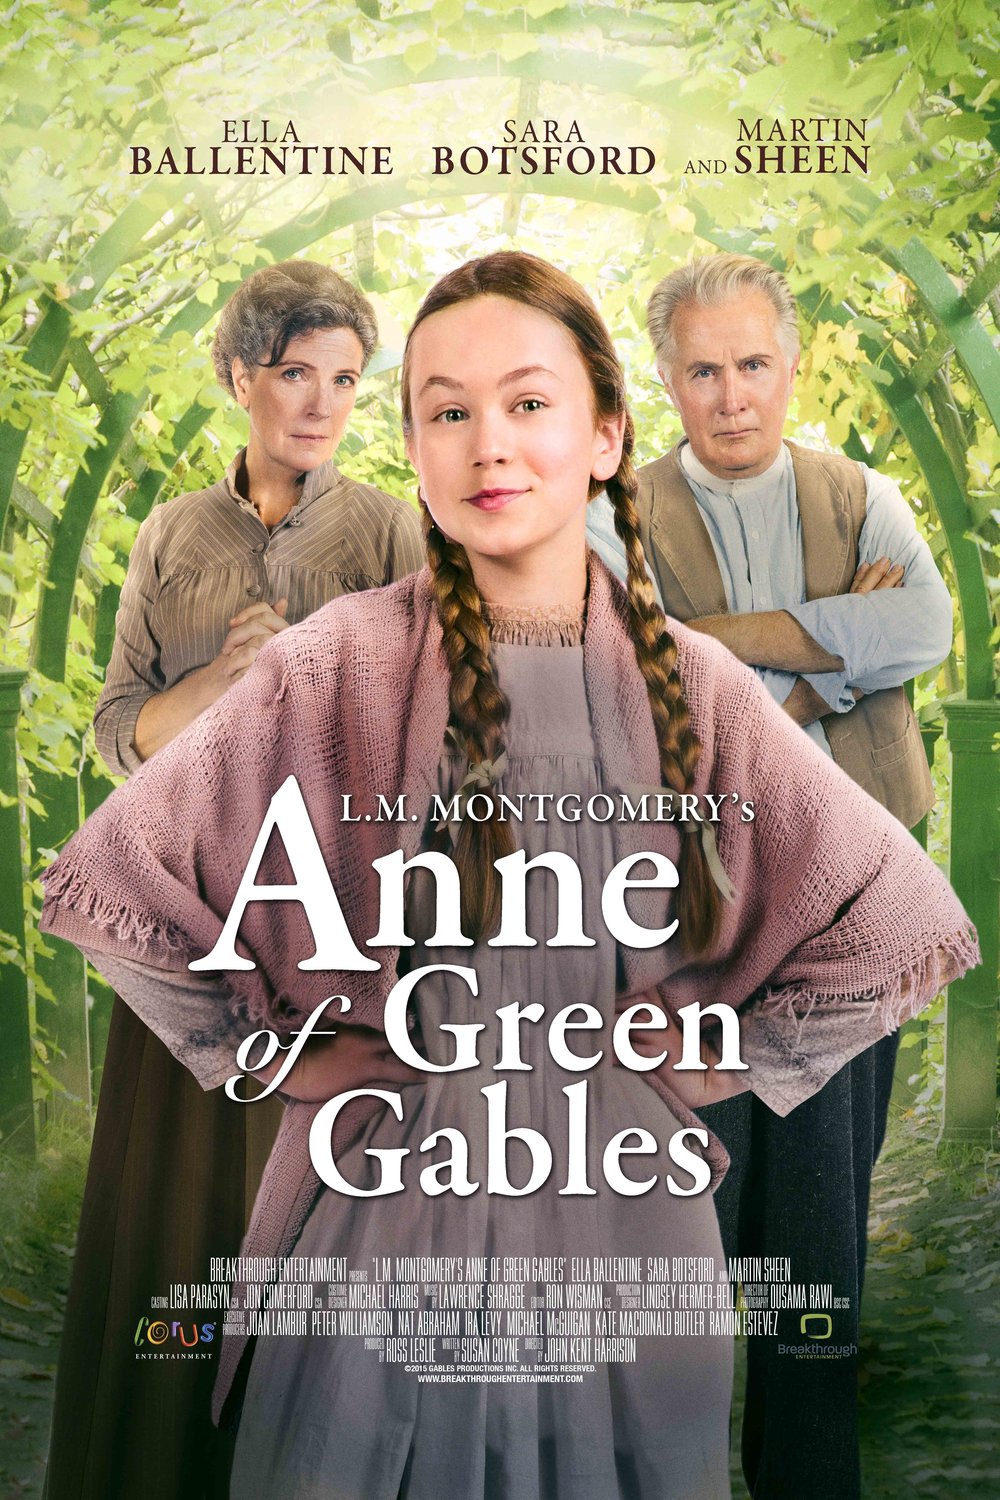 Poster of the movie Anne of Green Gables